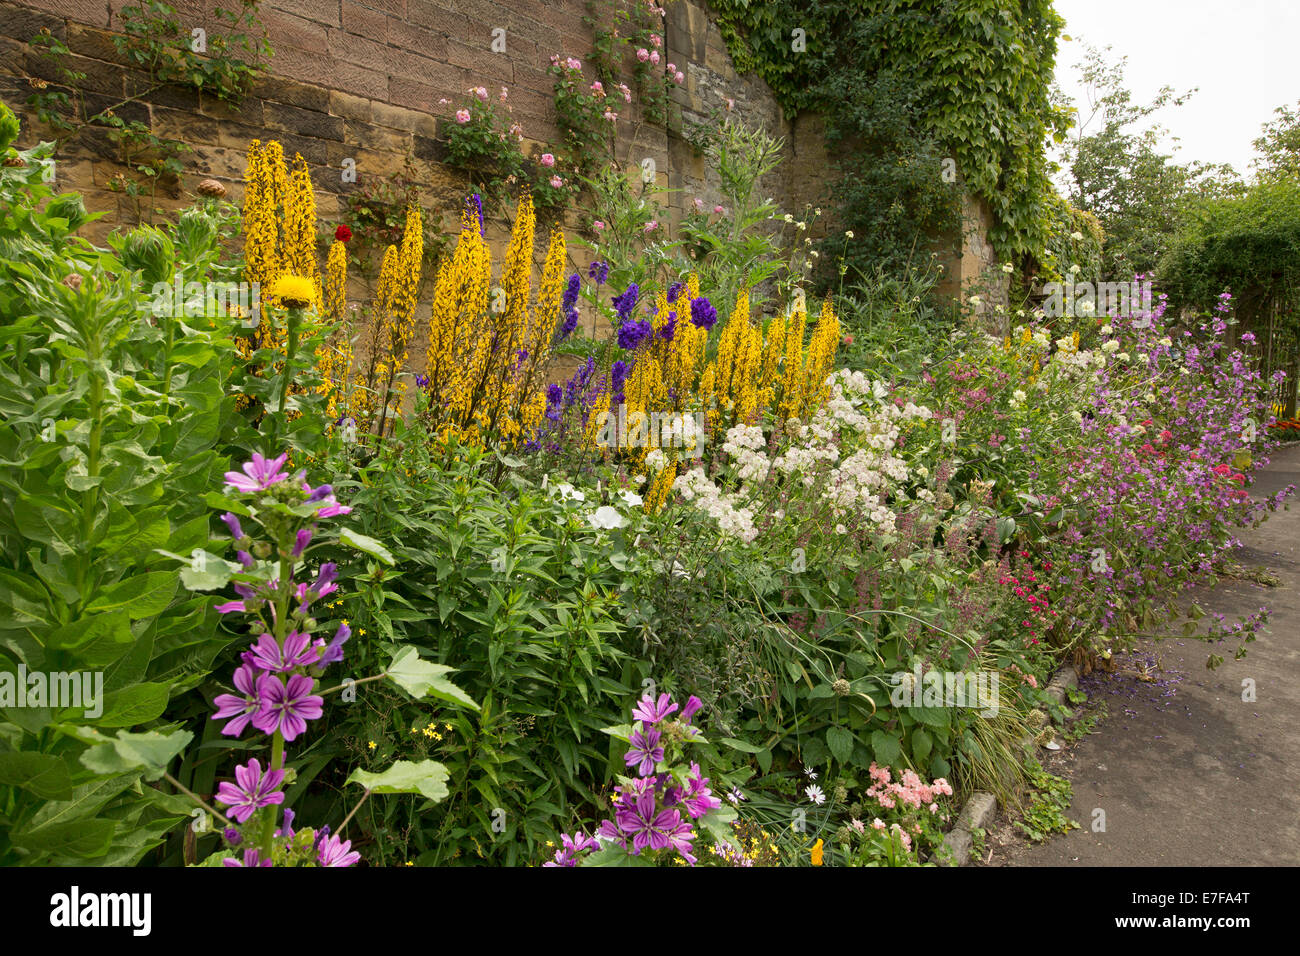 Colourful spring display of tall flowers and foliage in herbaceous border beside stone wall at Bath Gardens, Bakewell England Stock Photo